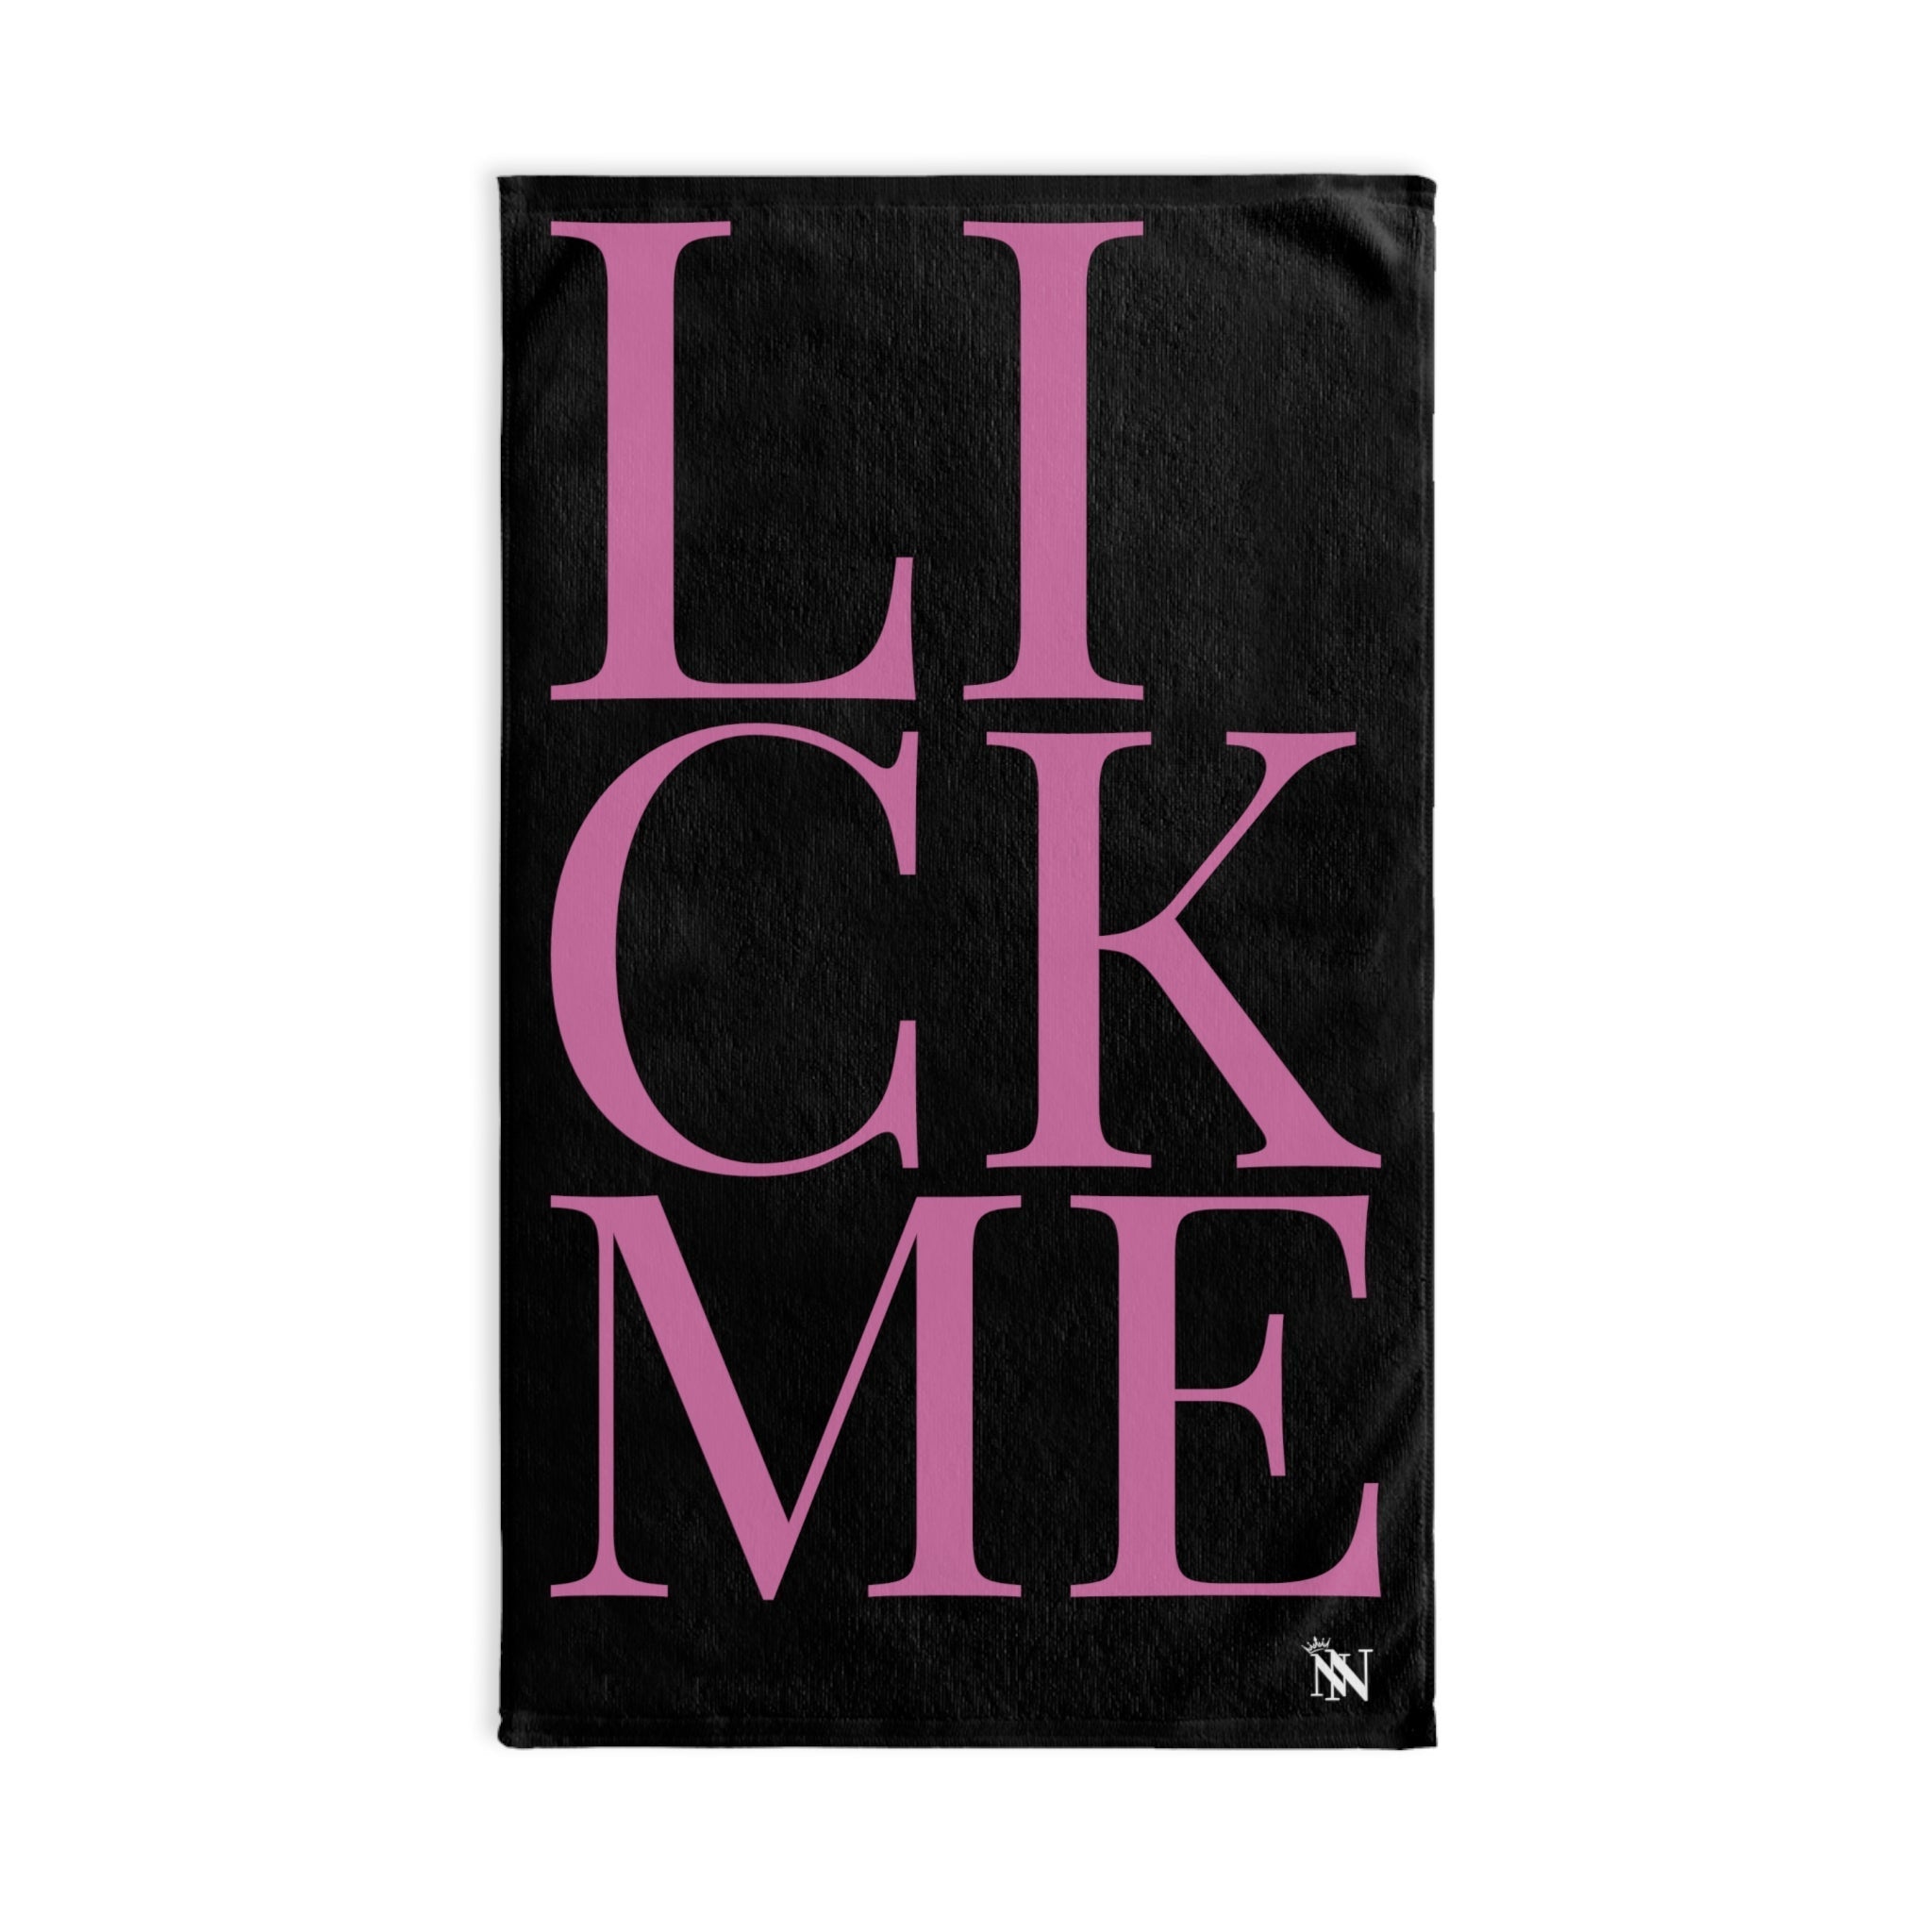 Lick Me PinkBlack | Sexy Gifts for Boyfriend, Funny Towel Romantic Gift for Wedding Couple Fiance First Year 2nd Anniversary Valentines, Party Gag Gifts, Joke Humor Cloth for Husband Men BF NECTAR NAPKINS